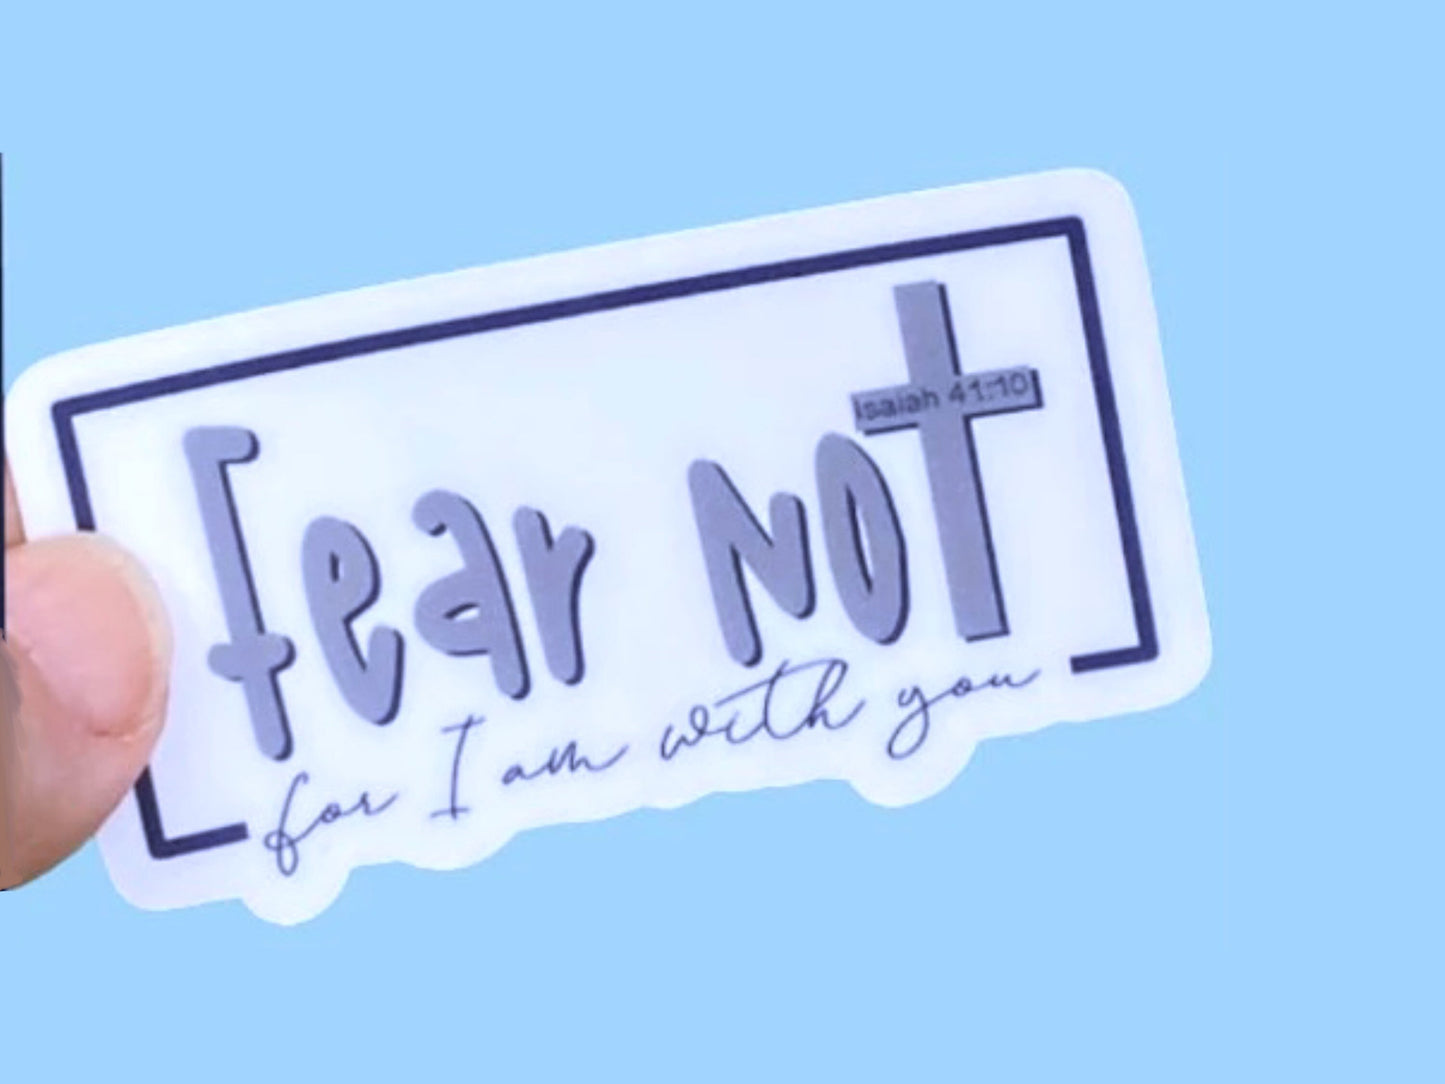 Fear Not for I am with you, Christian Faith UV/ Waterproof Vinyl Sticker/ Decal- Choice of Size